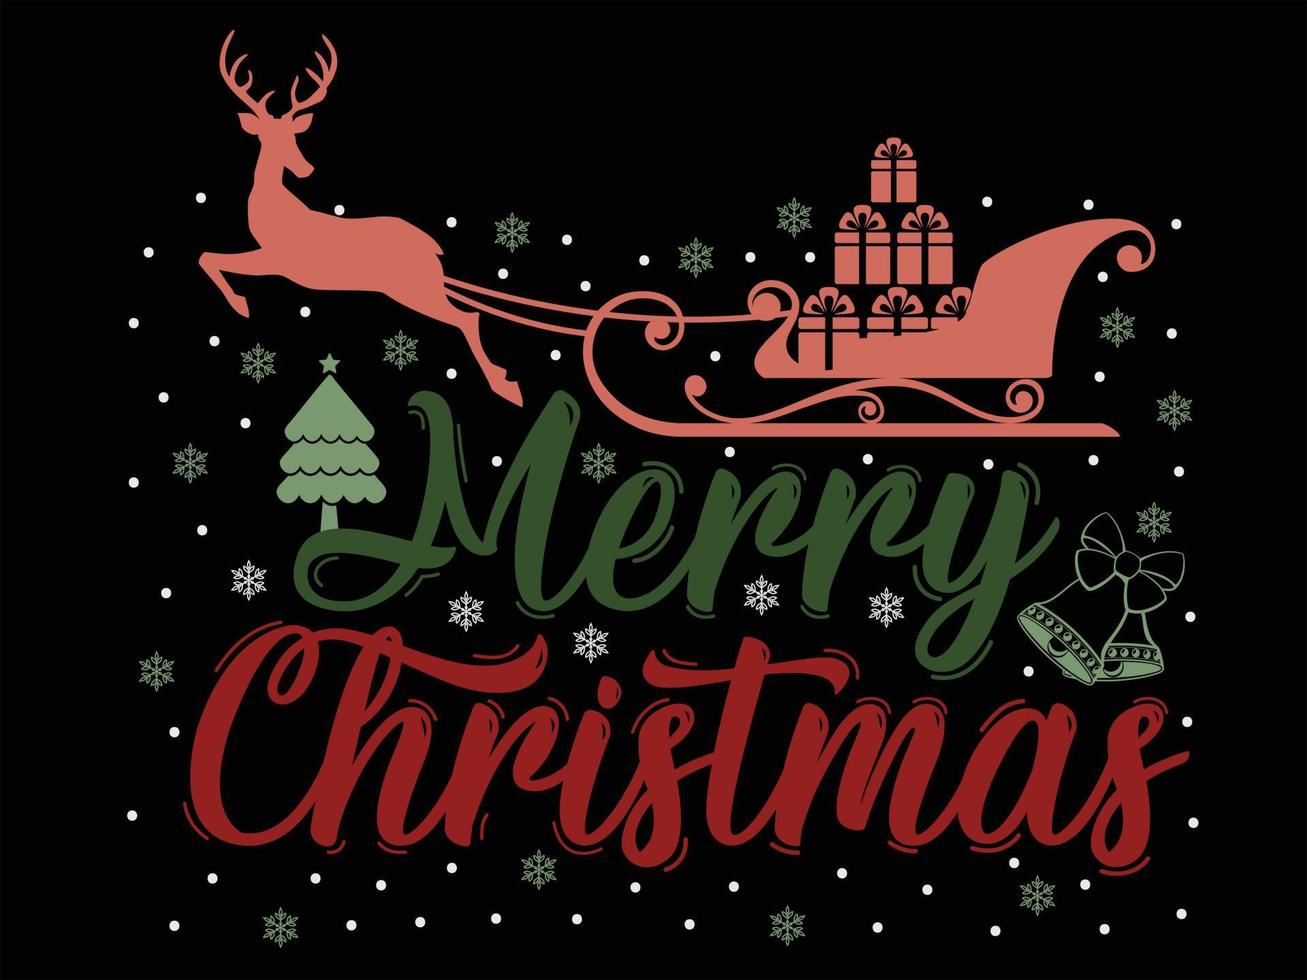 Merry Christmas 02 Merry Christmas and Happy Holidays Typography set vector